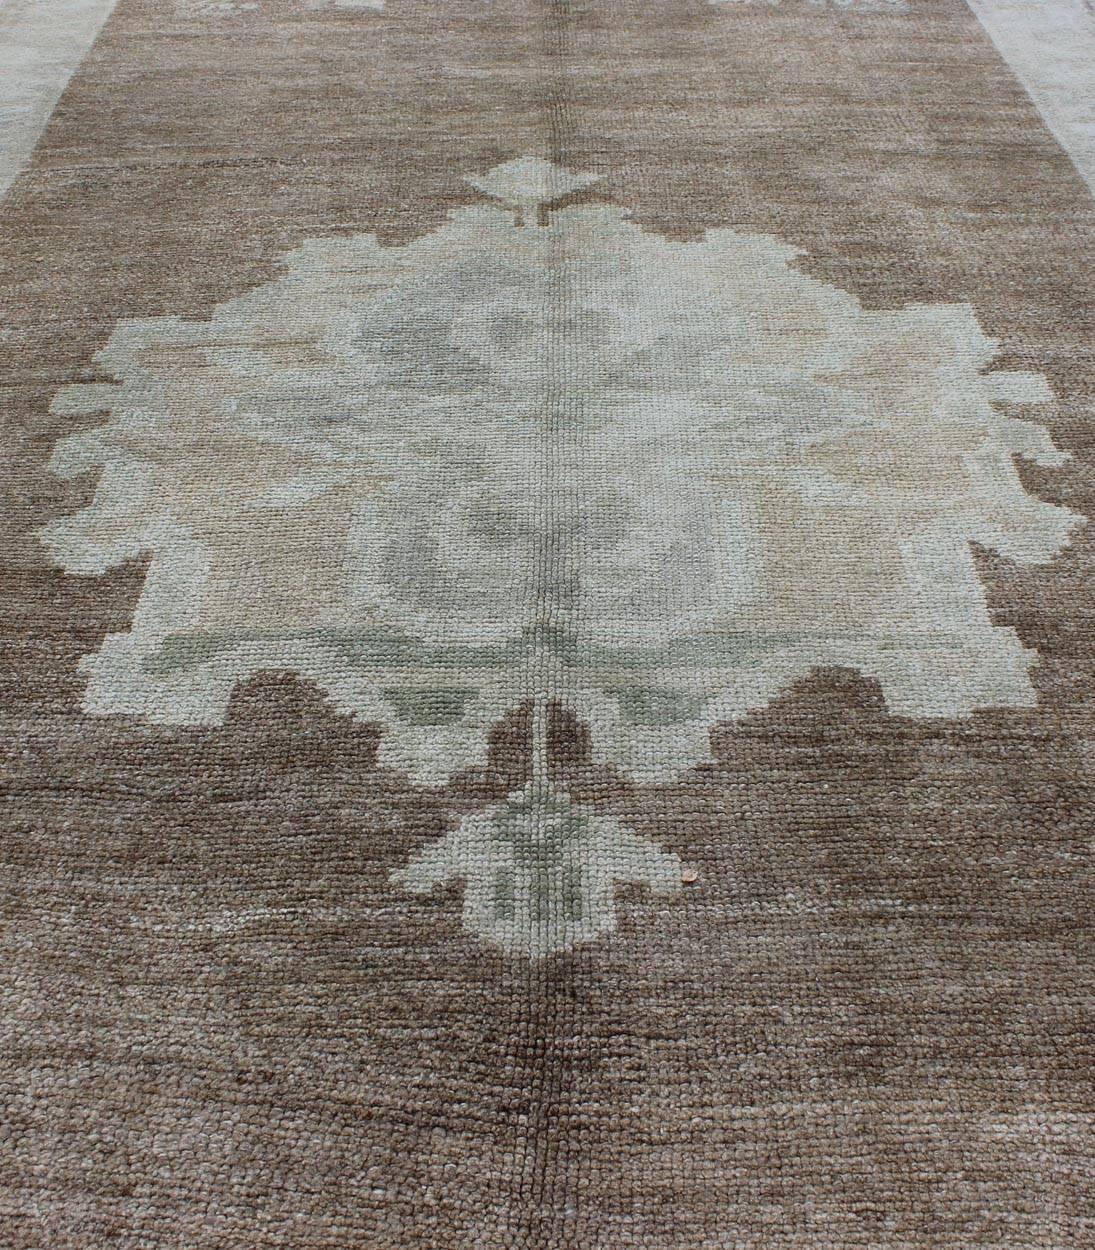 Wool Vintage Turkish Oushak Rug with Floral Cornices in Light Brown, Gray and Cream For Sale